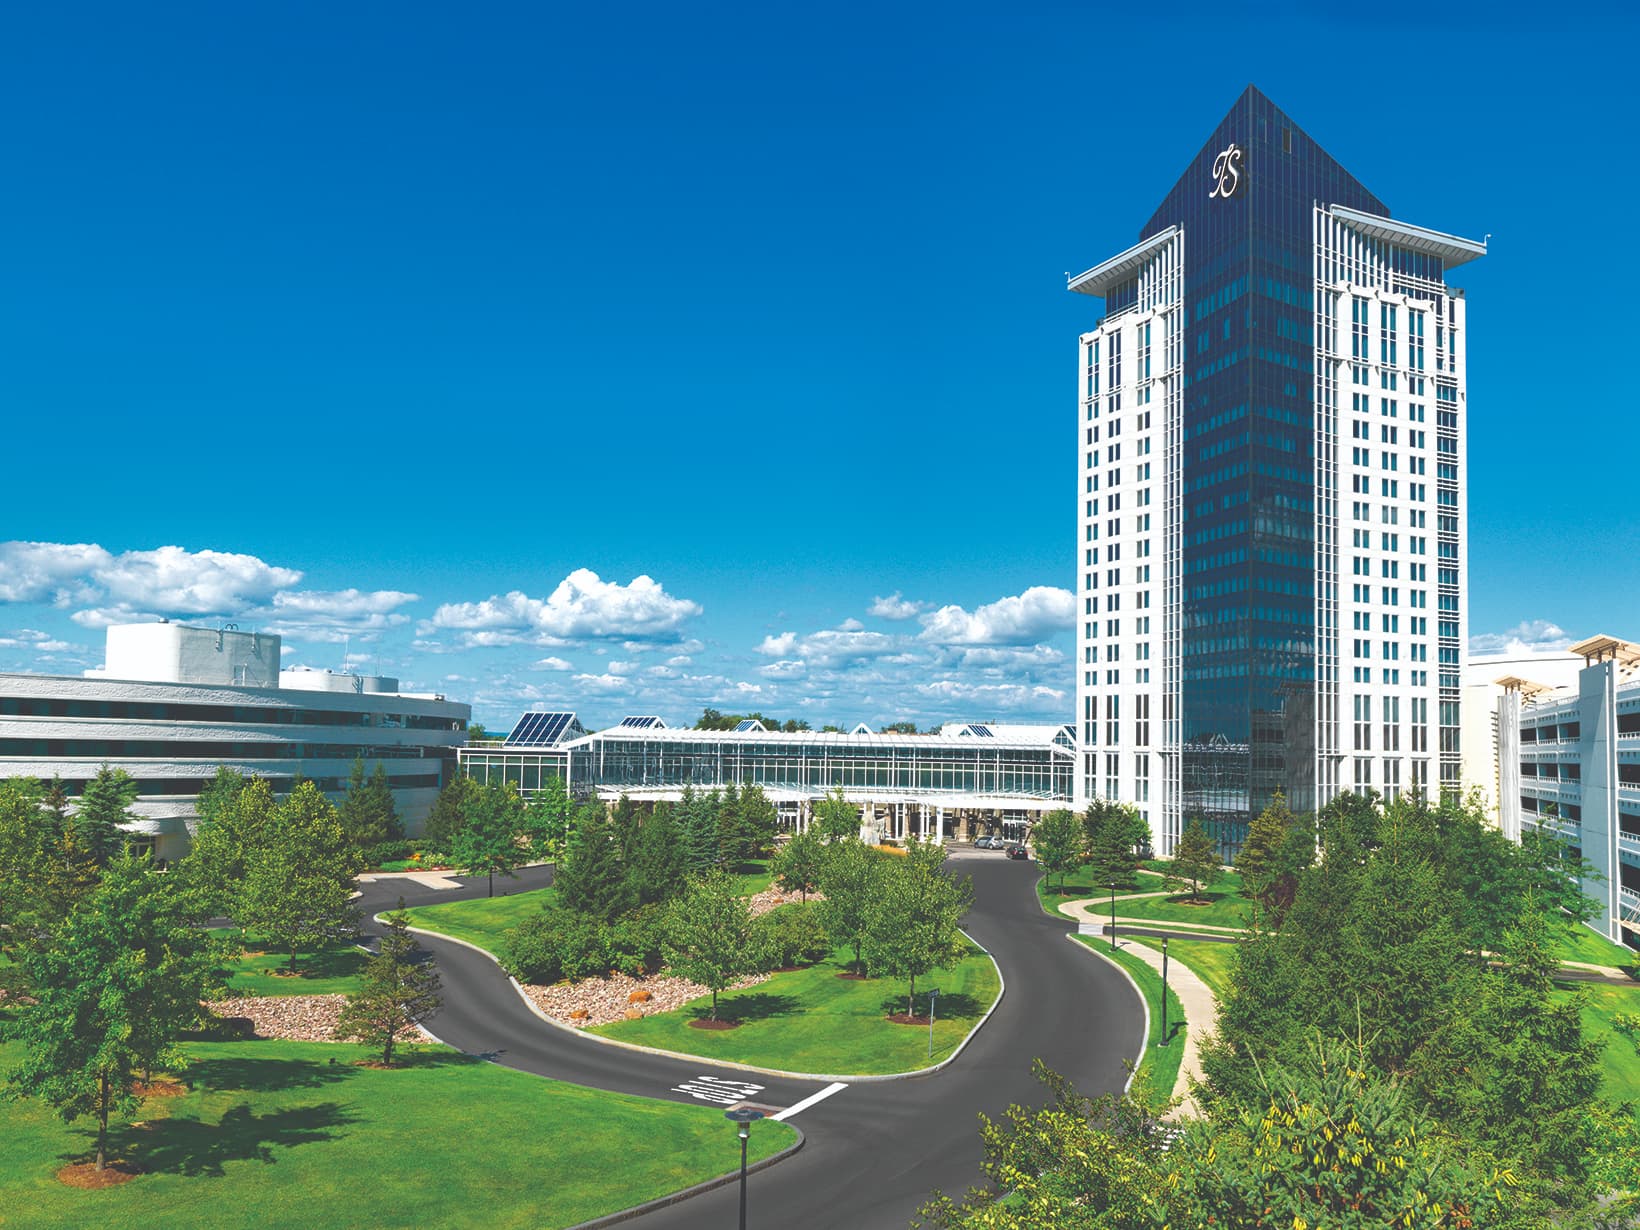 The Turning Stone Resort Casino campus on a sunny summer day